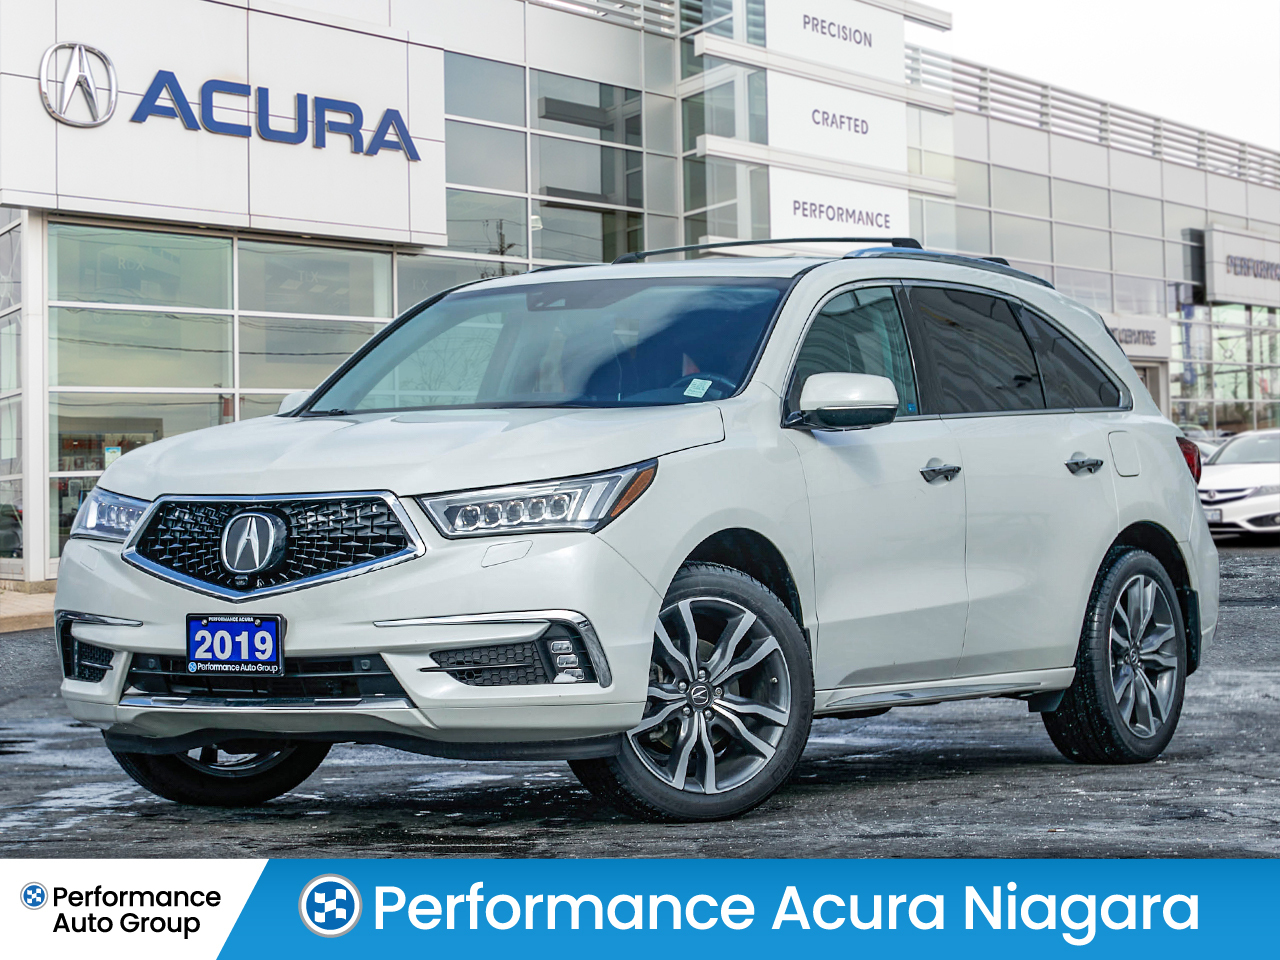 2019 Acura MDX SOLD - PENDING DELIVERY